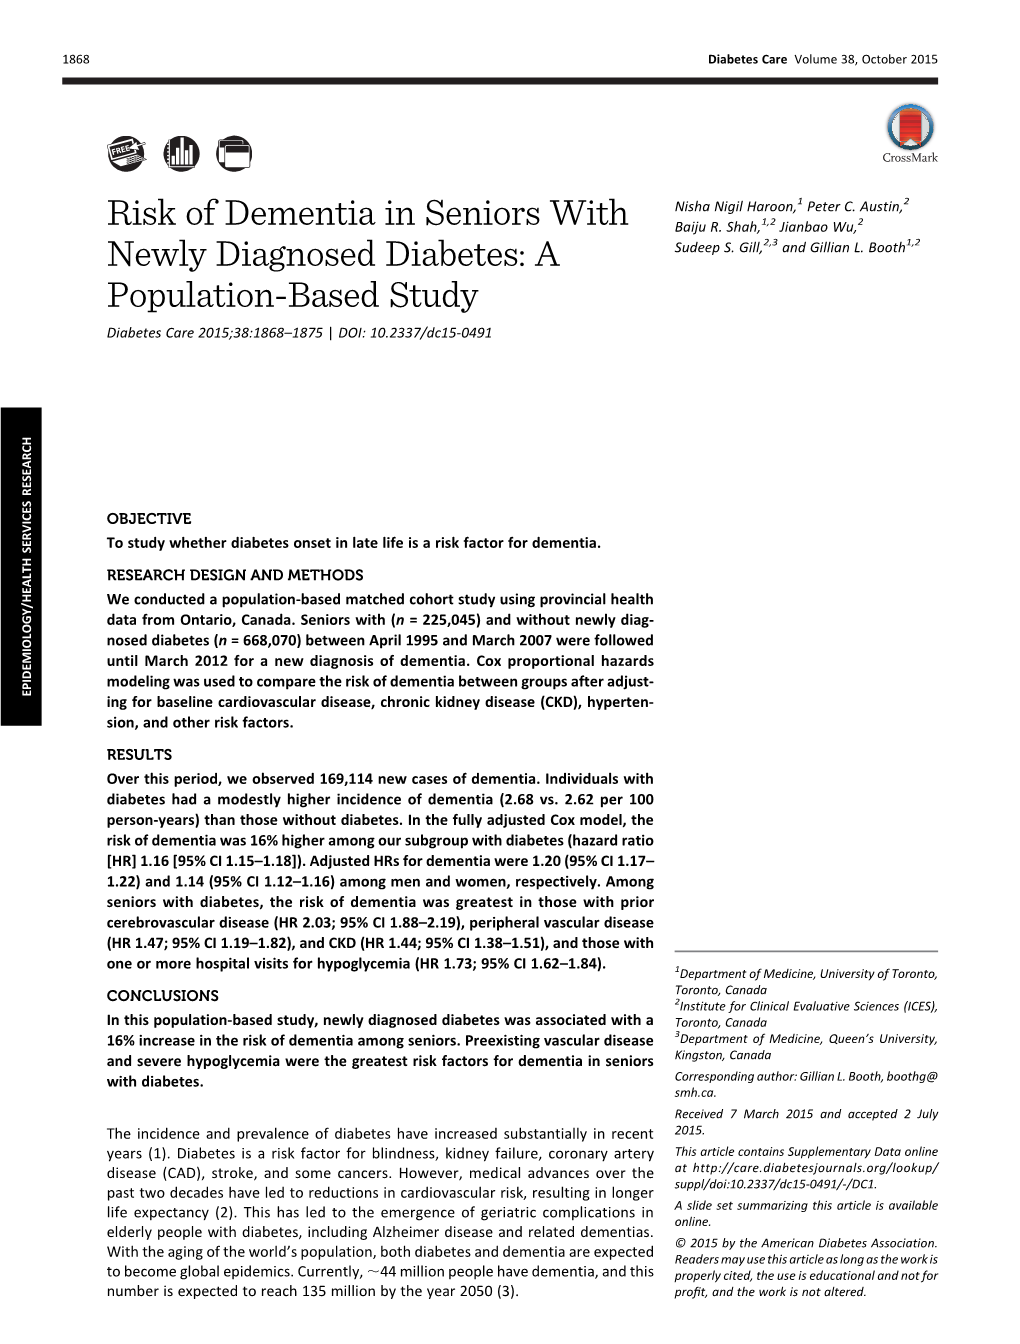 Risk of Dementia in Seniors with Newly Diagnosed